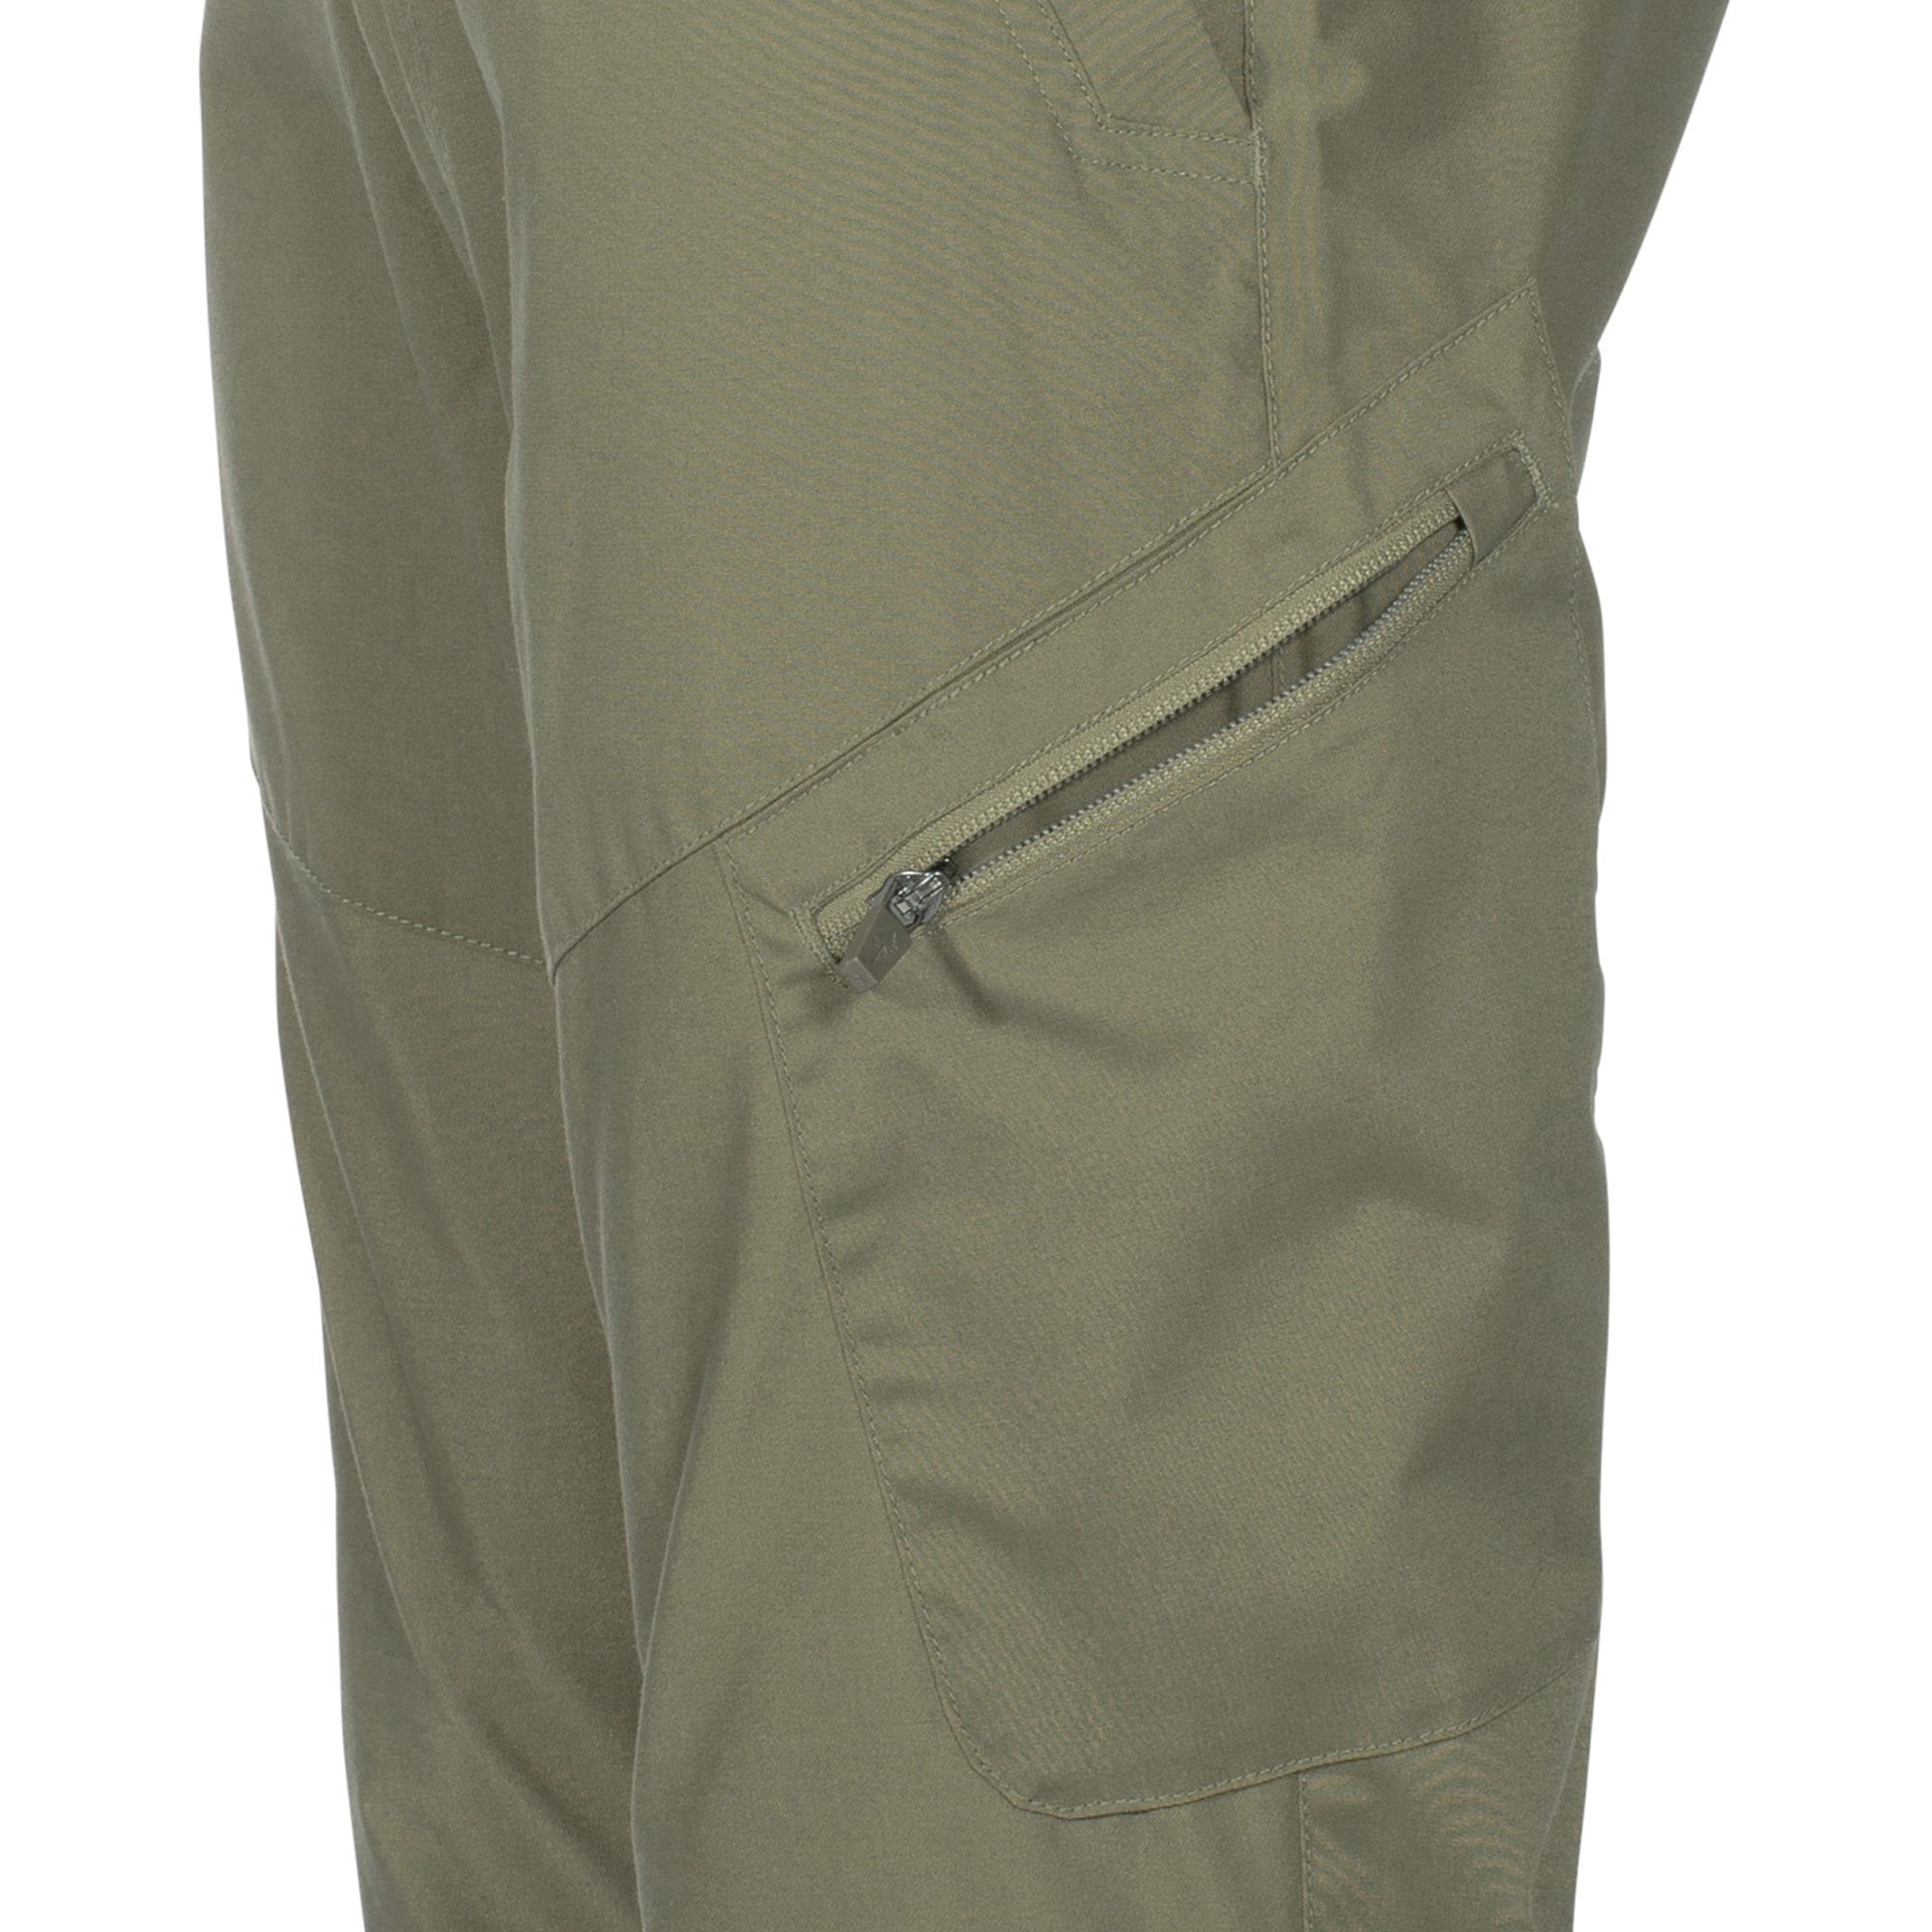 Pinewood Tiveden TC InsectStop Pants olive | Pinewood Tiveden TC ...